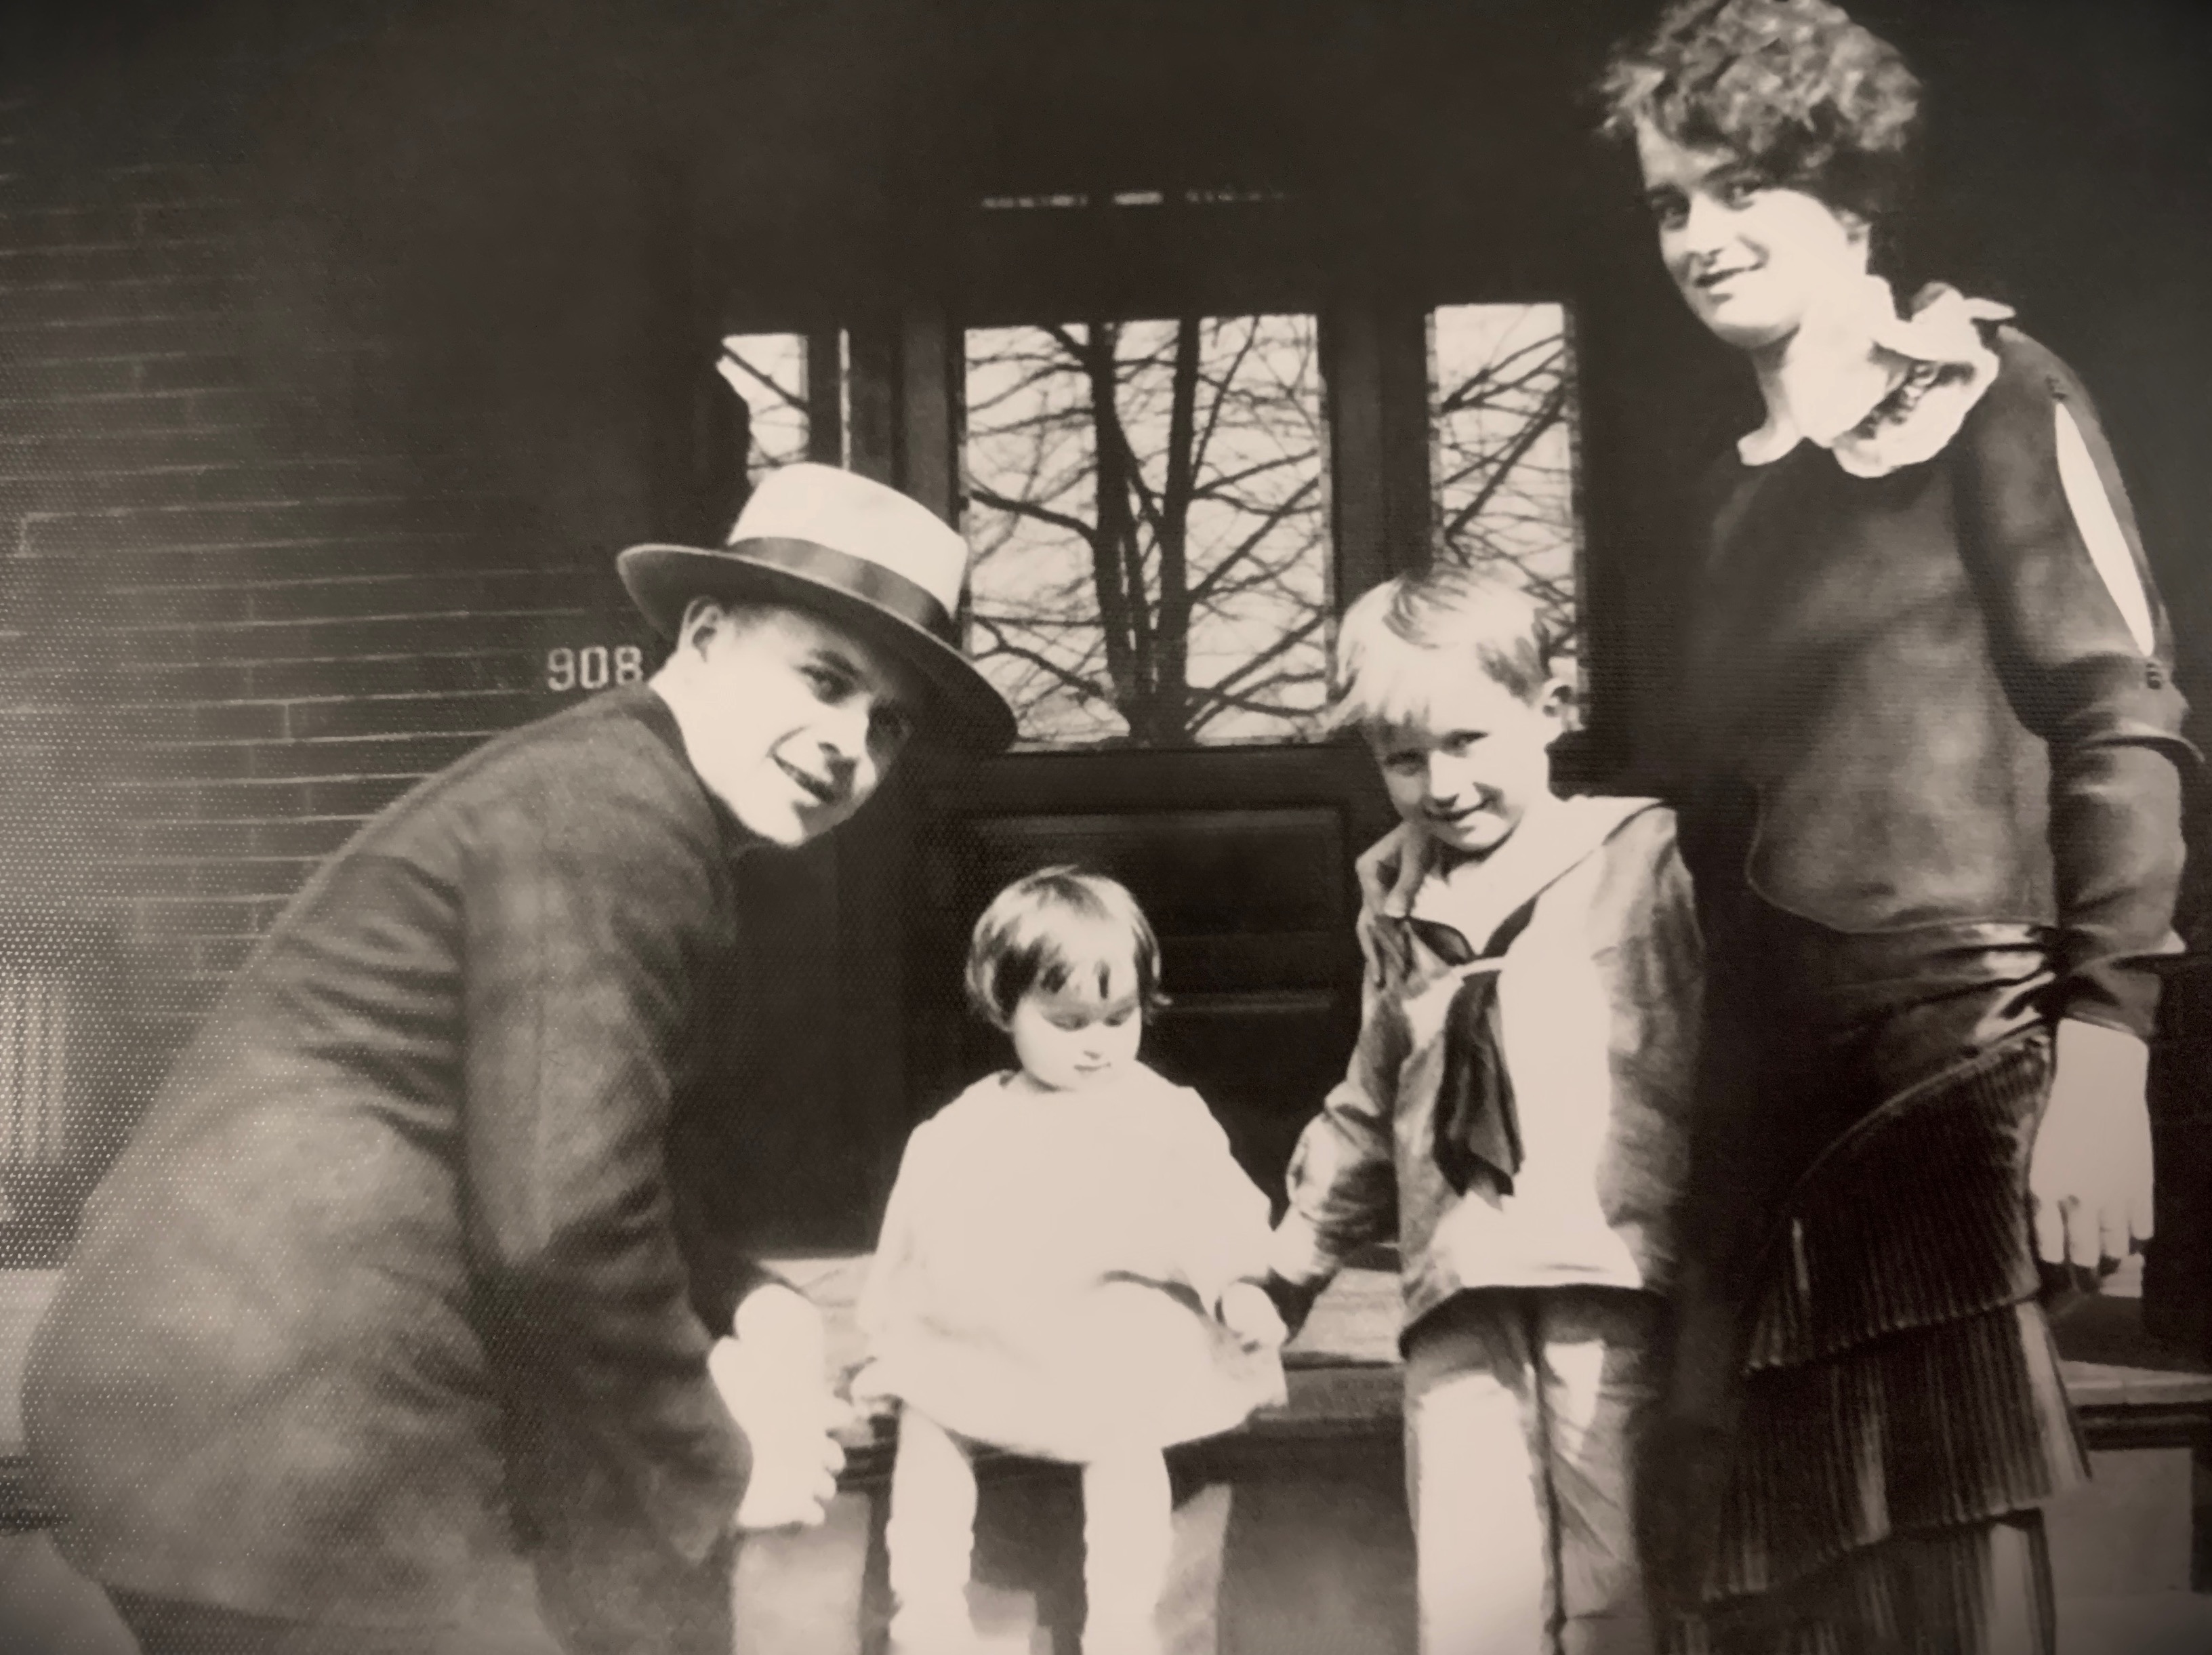 The Shoff family - Charles, Jane, Bob, and Janet in 1926